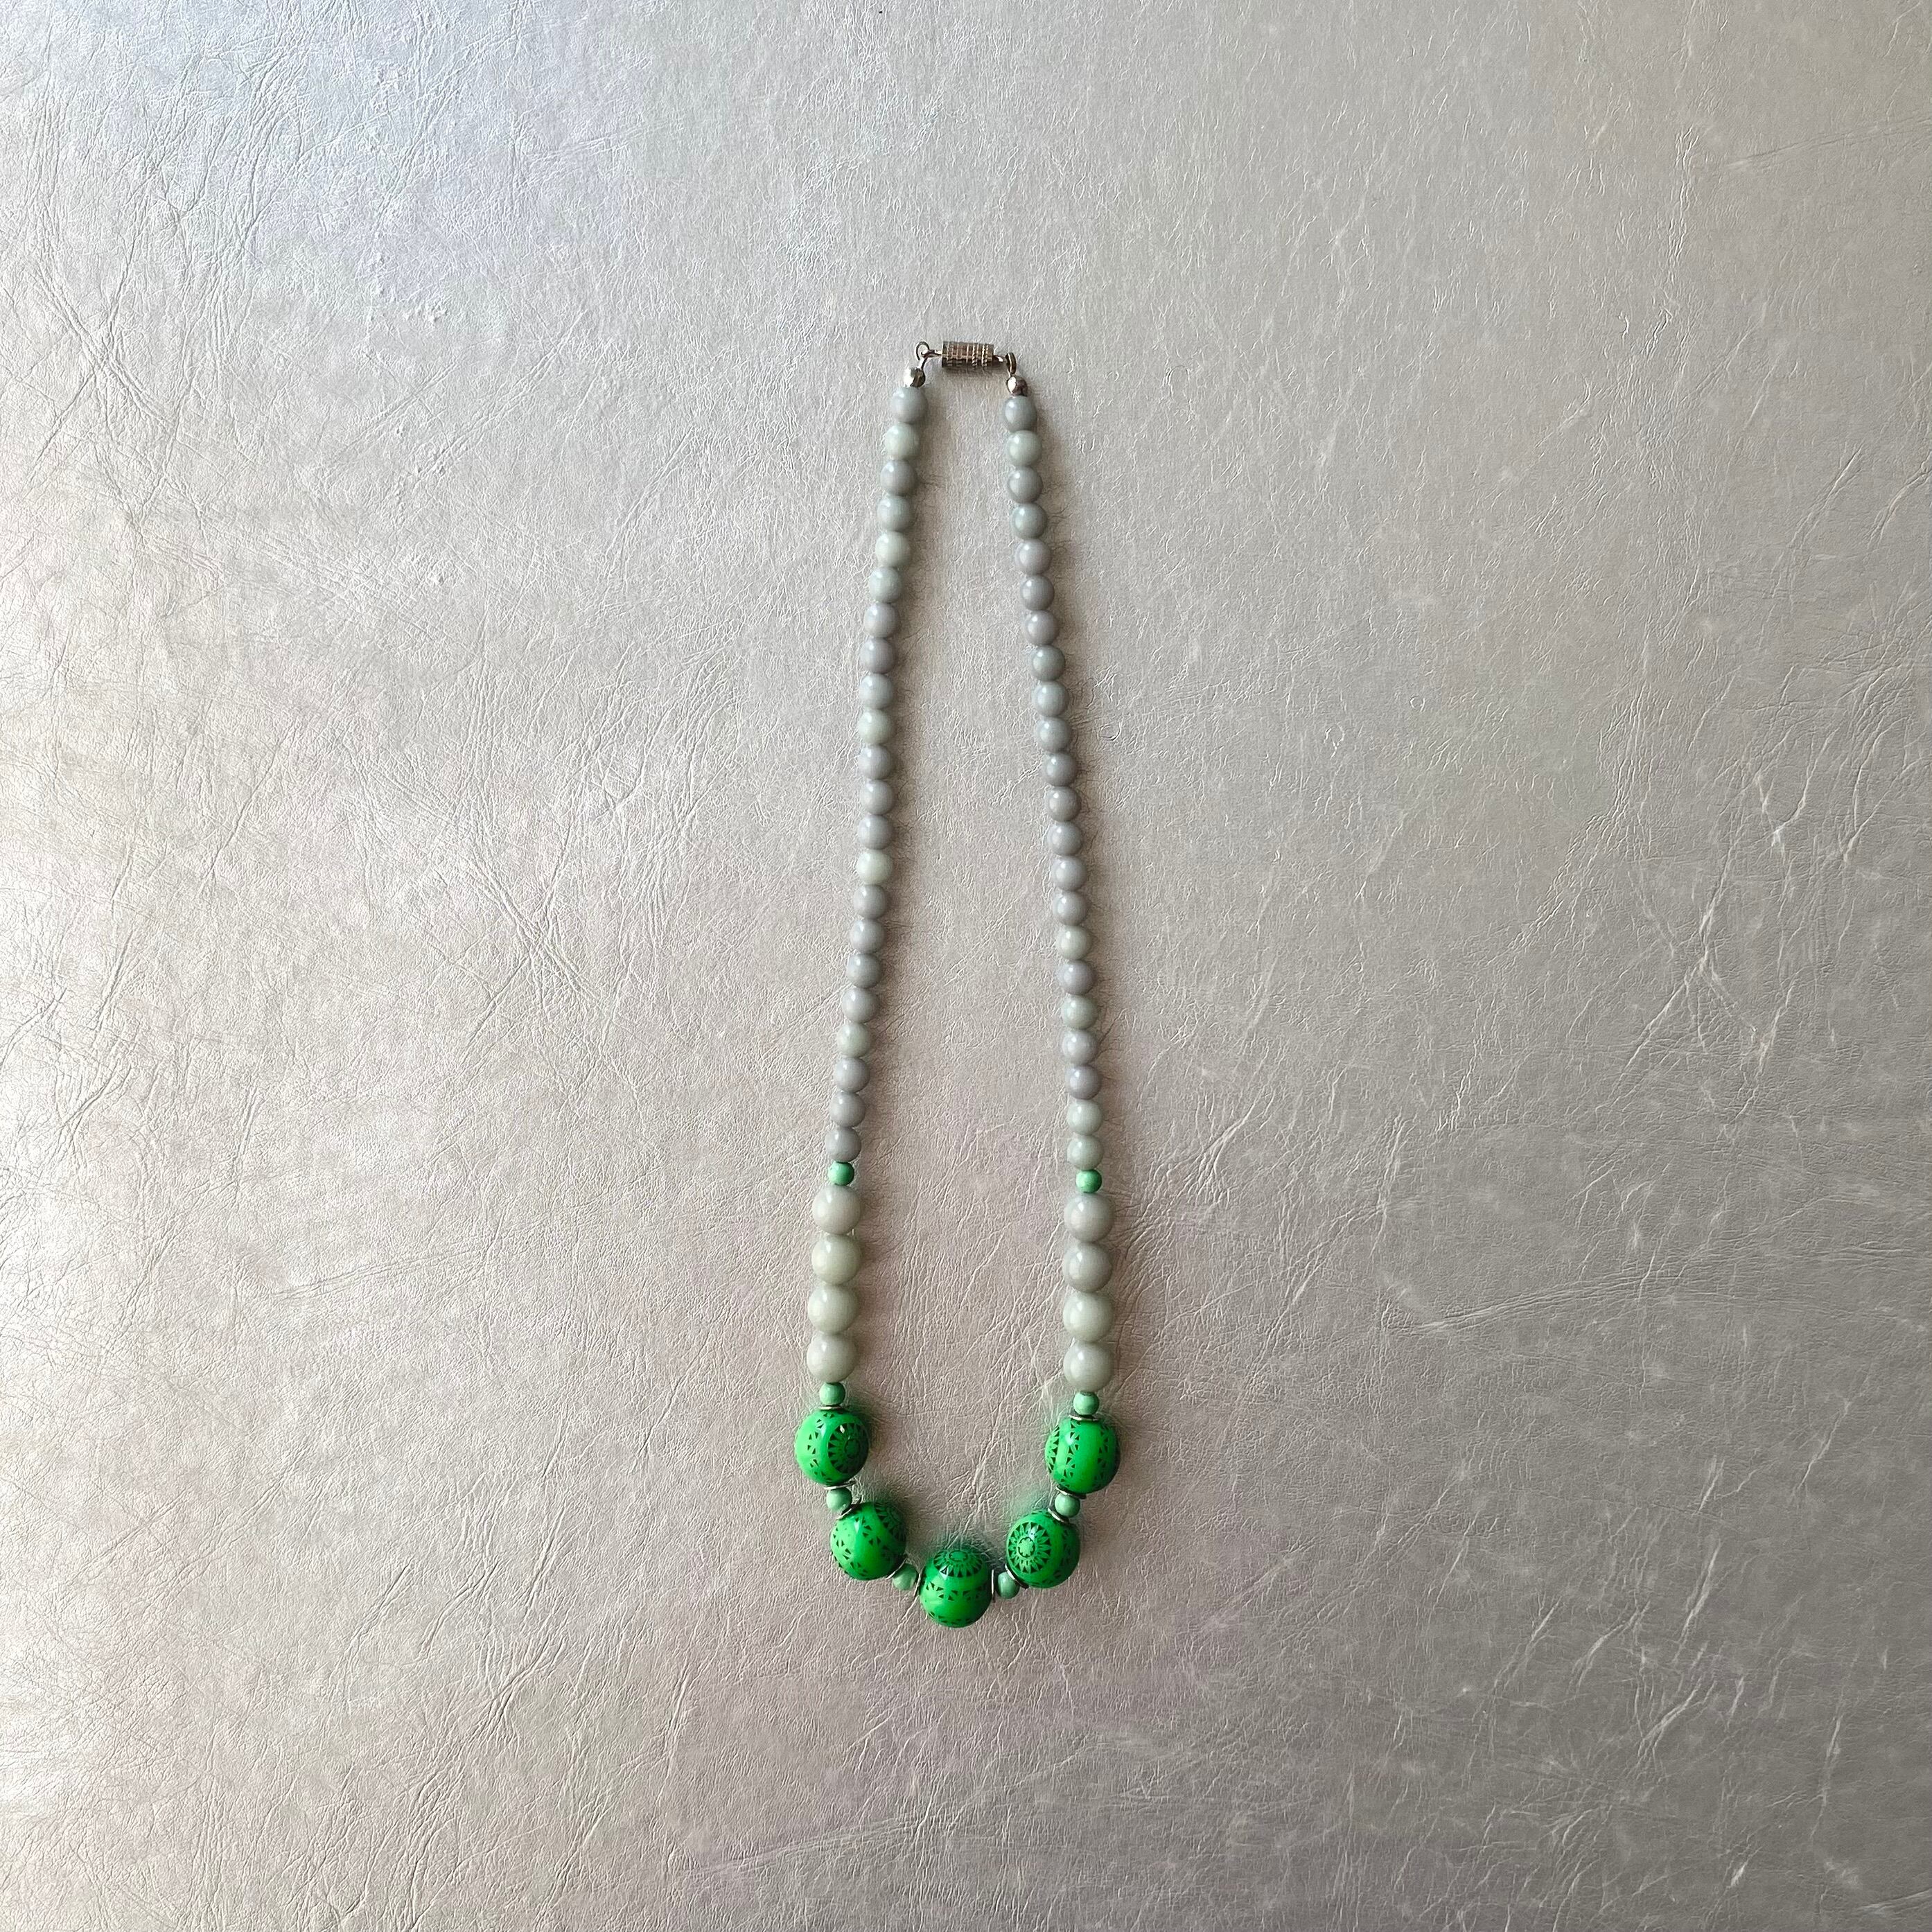 Vintage 80s〜90s retro green beads design necklace レトロ ヴィンテージ グリーン ビーズ デザイン  ネックレス